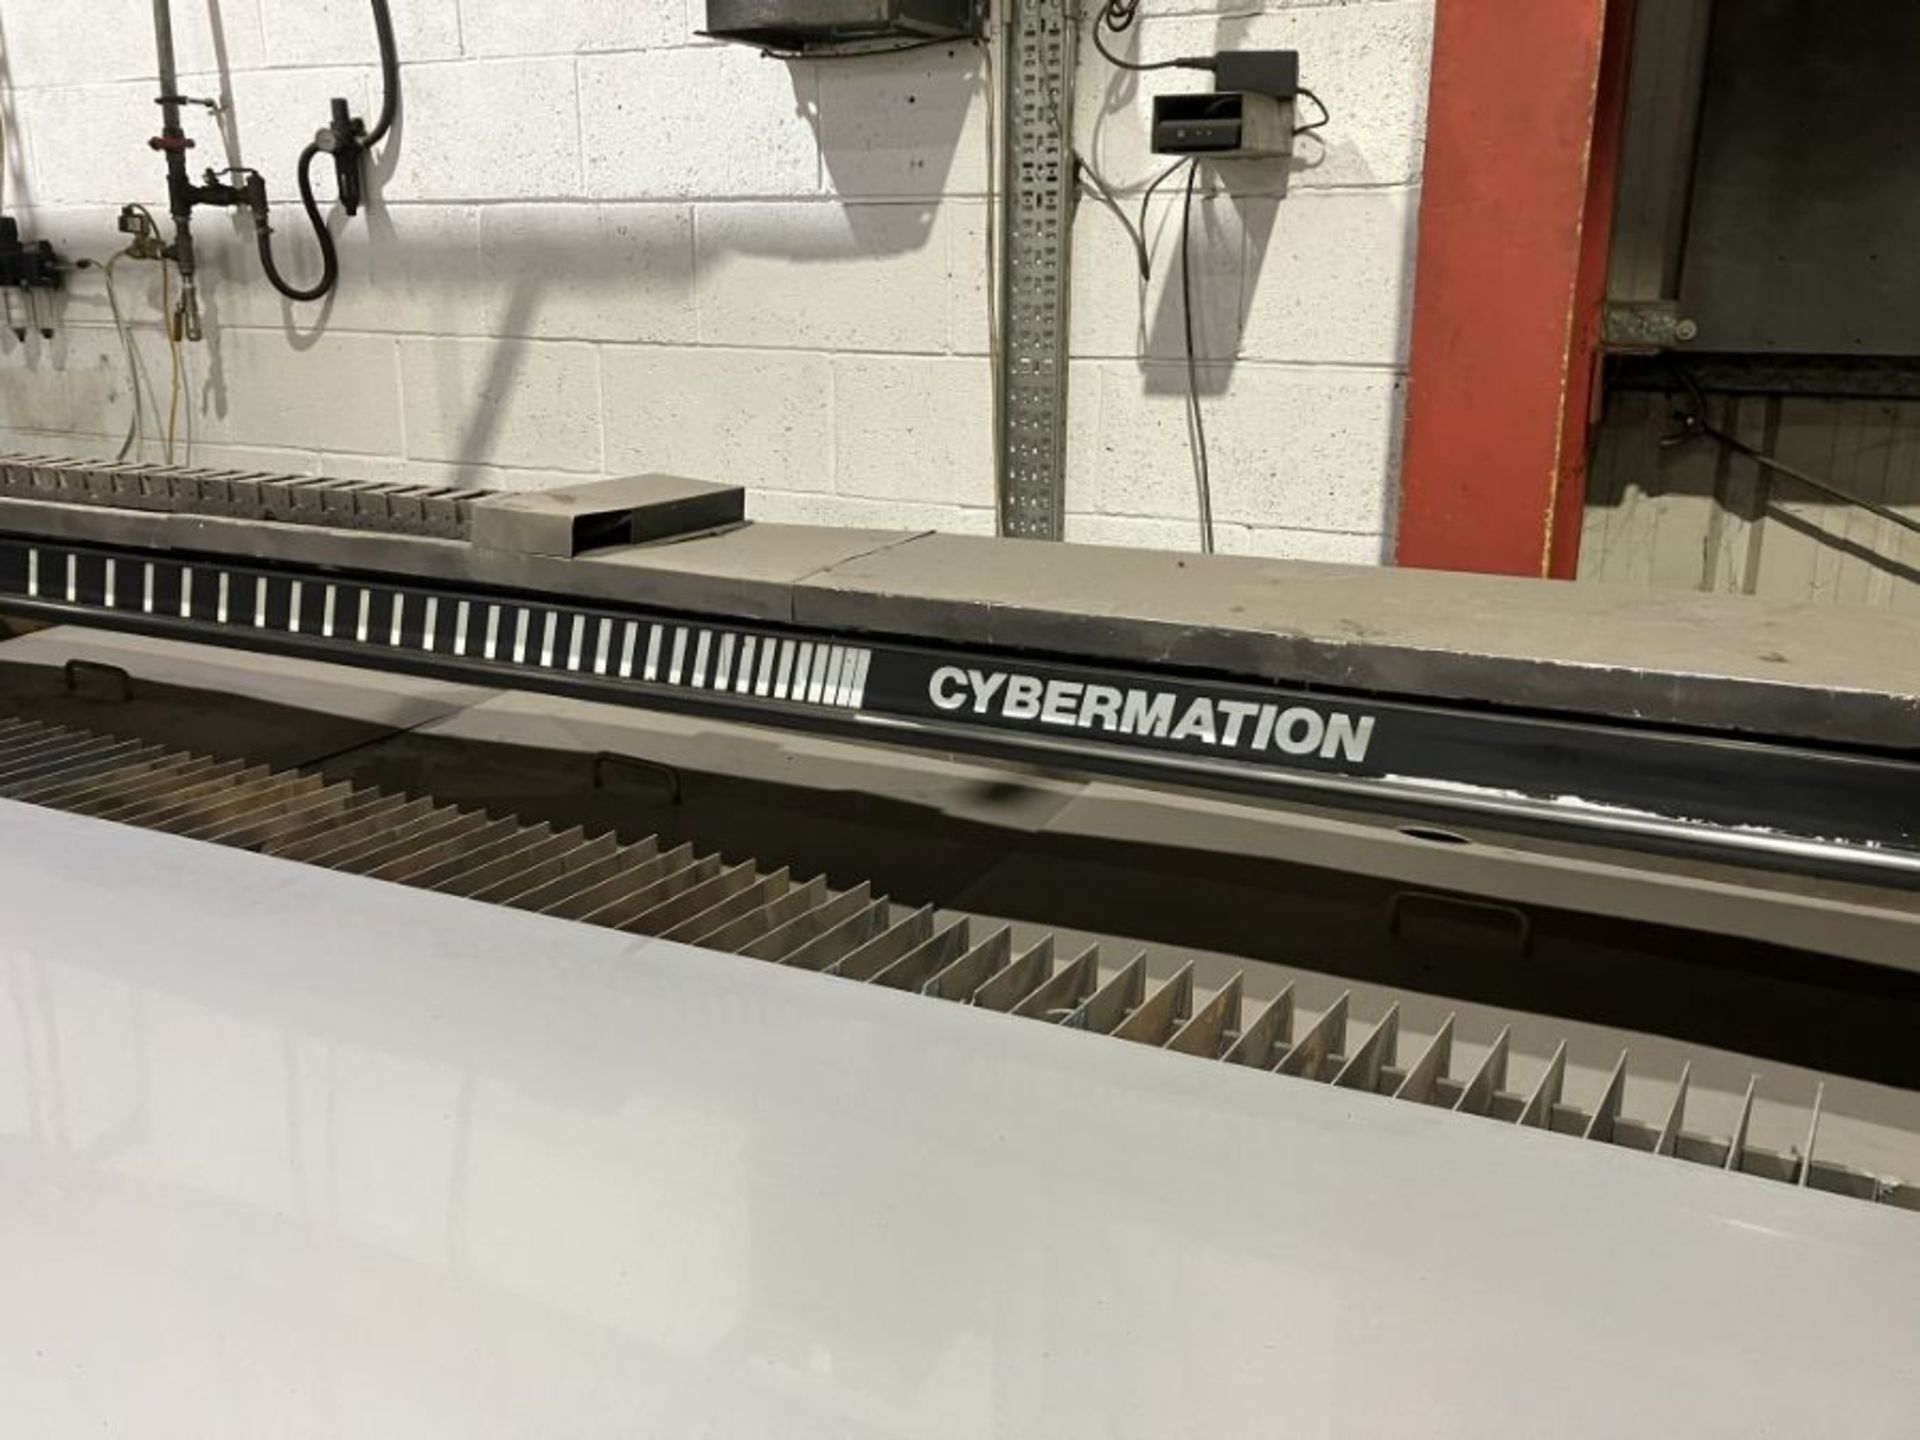 Cybermotion flat bed plasma profile cutter - Image 7 of 9